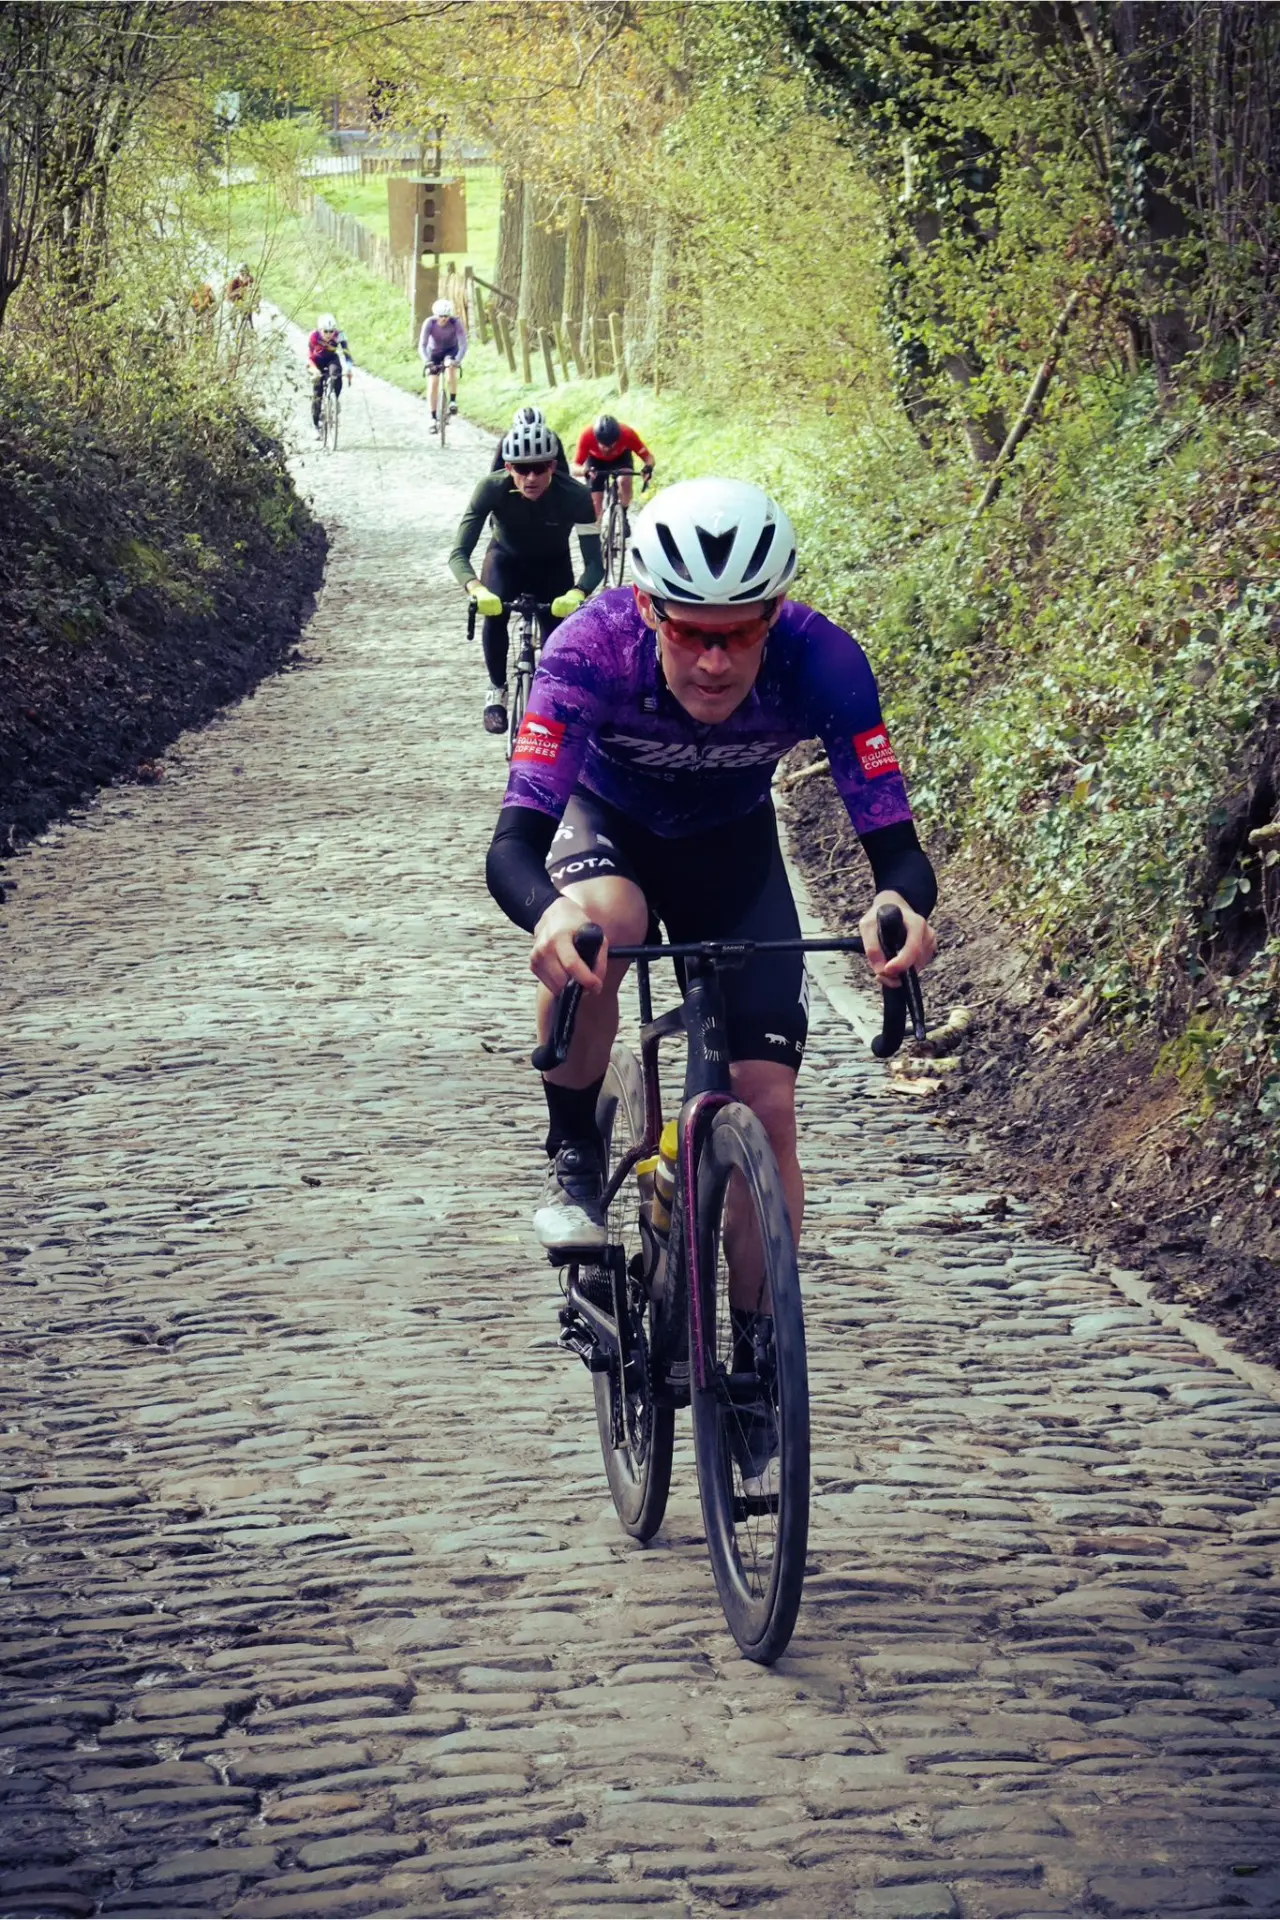 An action photo of Todd Markelz riding up the Koppenberg